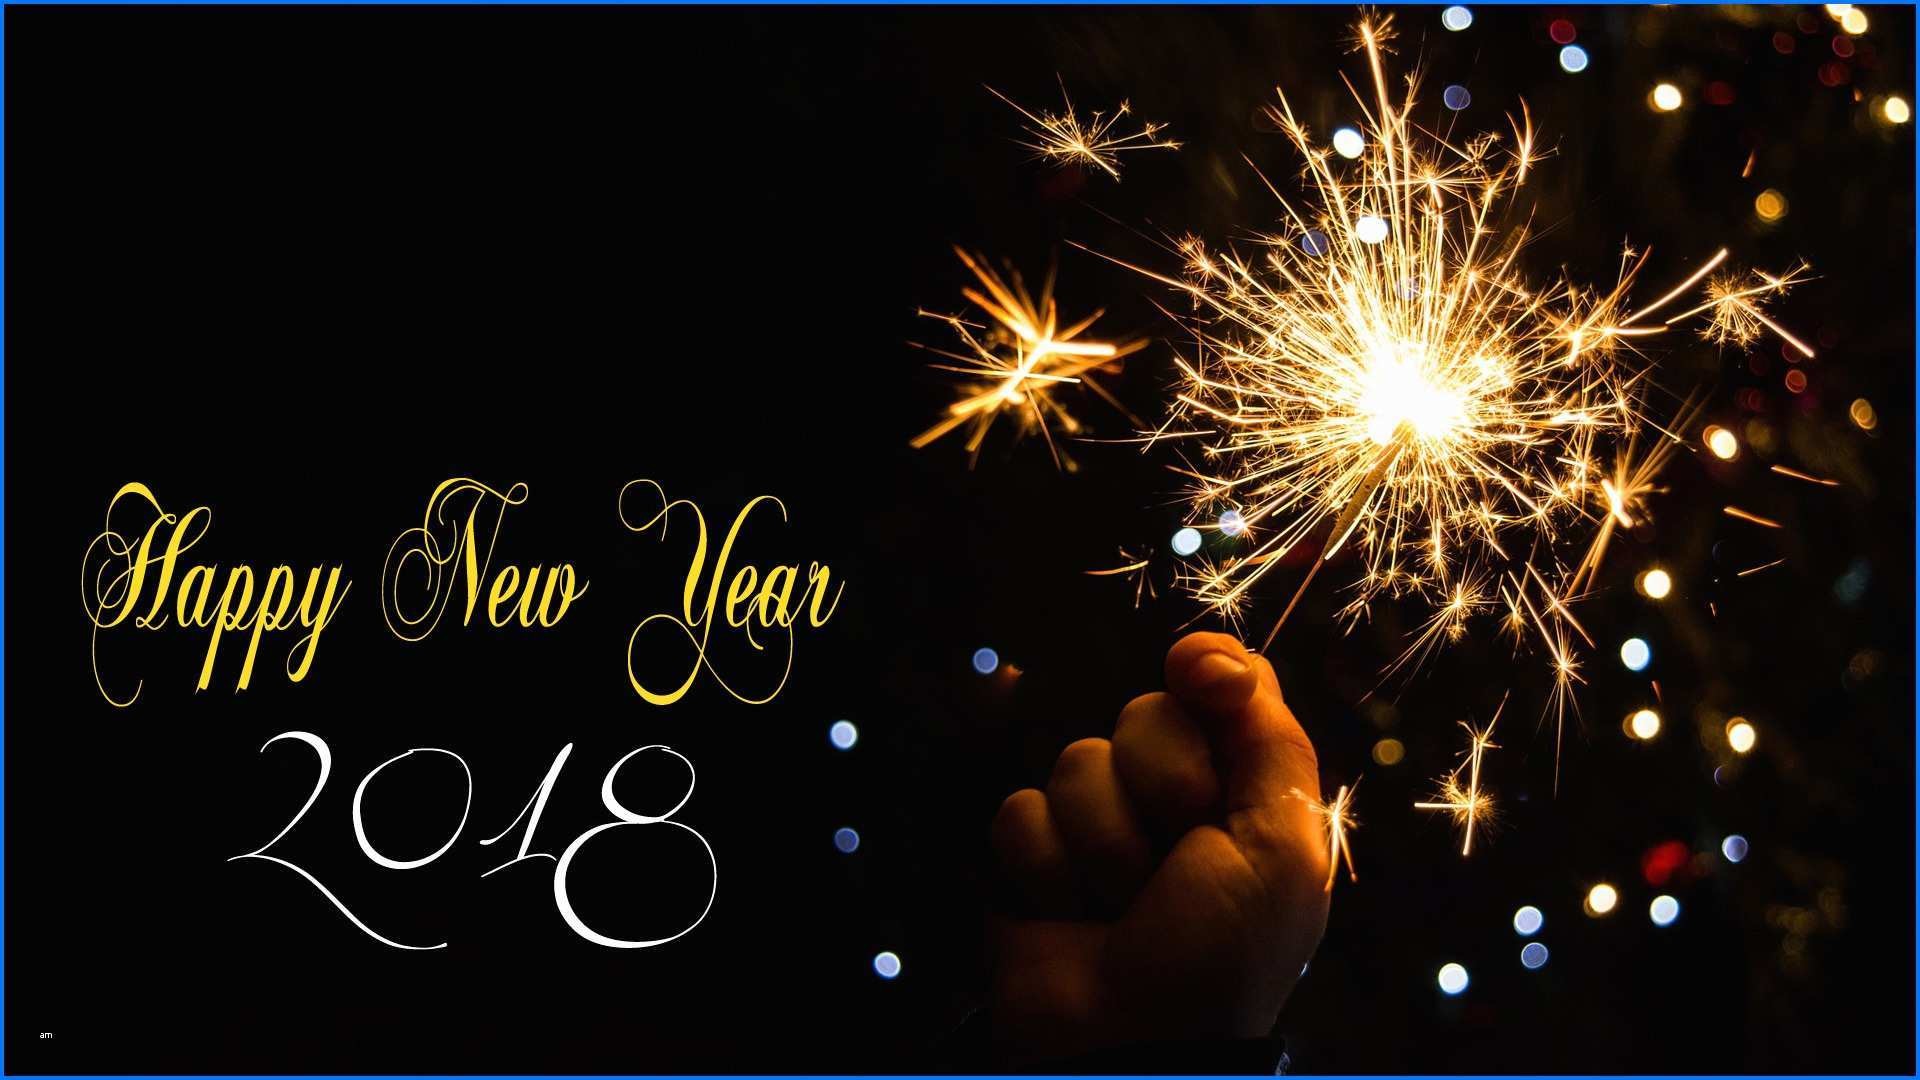 1920x1080 new year crackers wonderfully special happy new year 2018 wallpaper hd  greetings